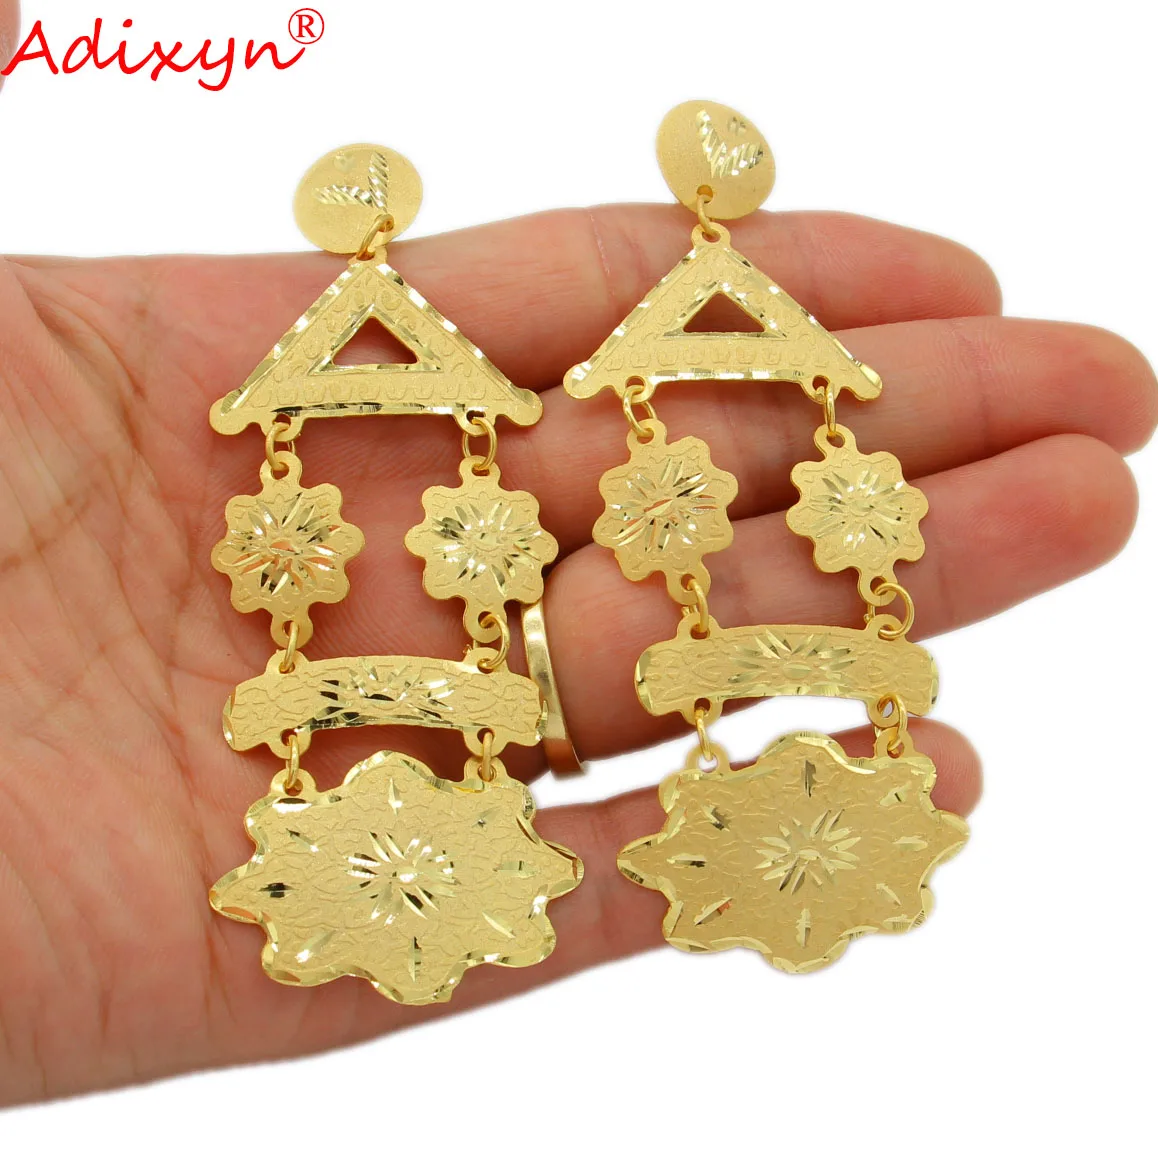 

Adixyn Dubai Hand-work Cutting Earrings for Women Girls 24k Gold Color/Copper African India Jewelry Gifts N01311